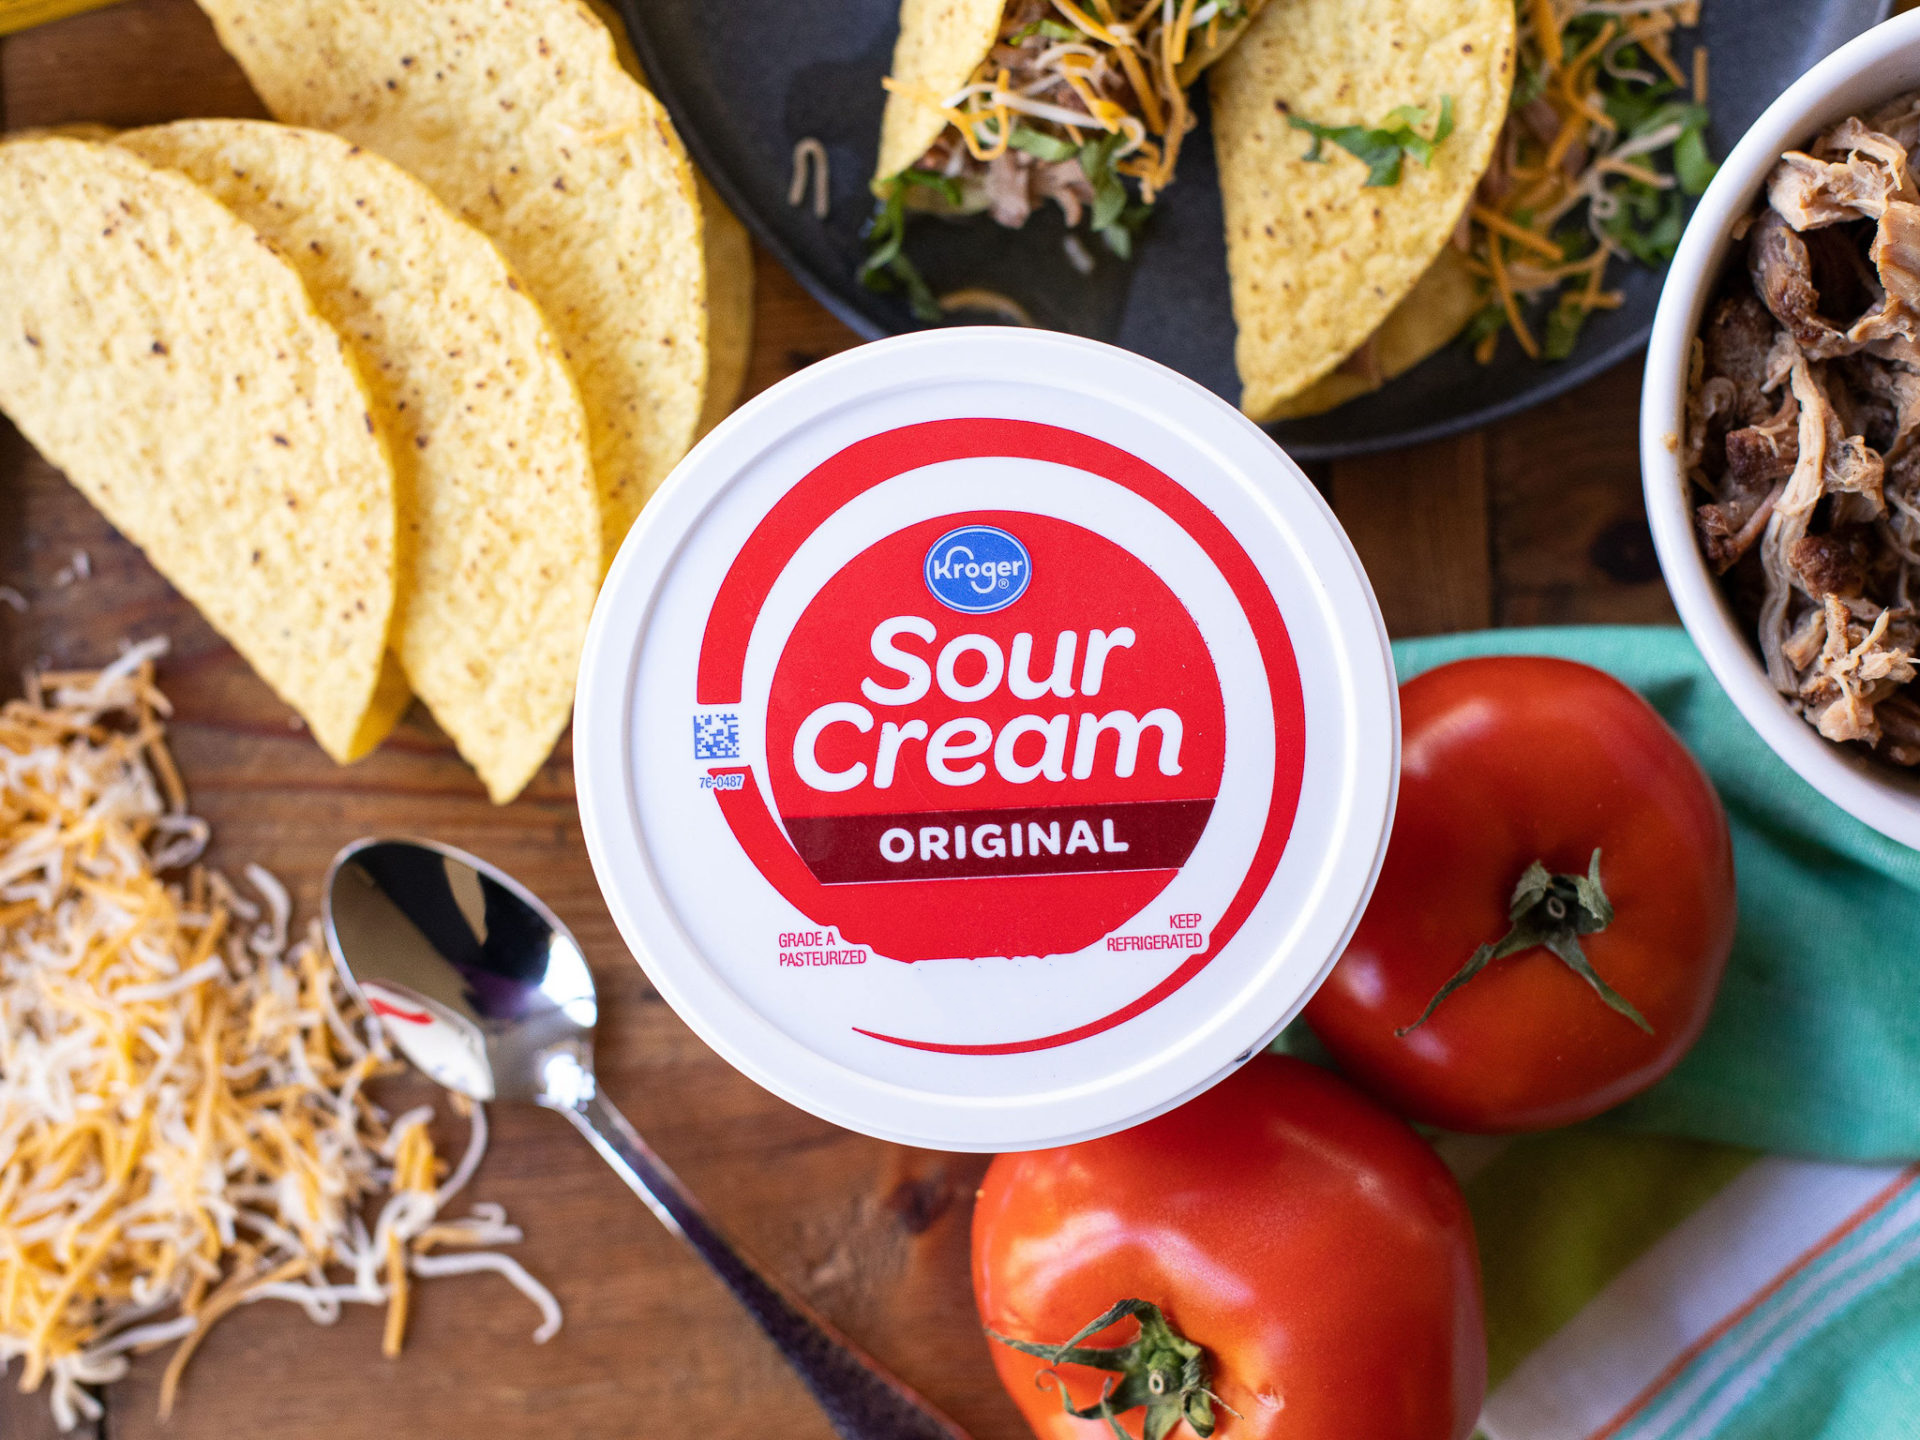 Get The BIG Containers Of Kroger Sour Cream or Cottage Cheese For Just $1.99